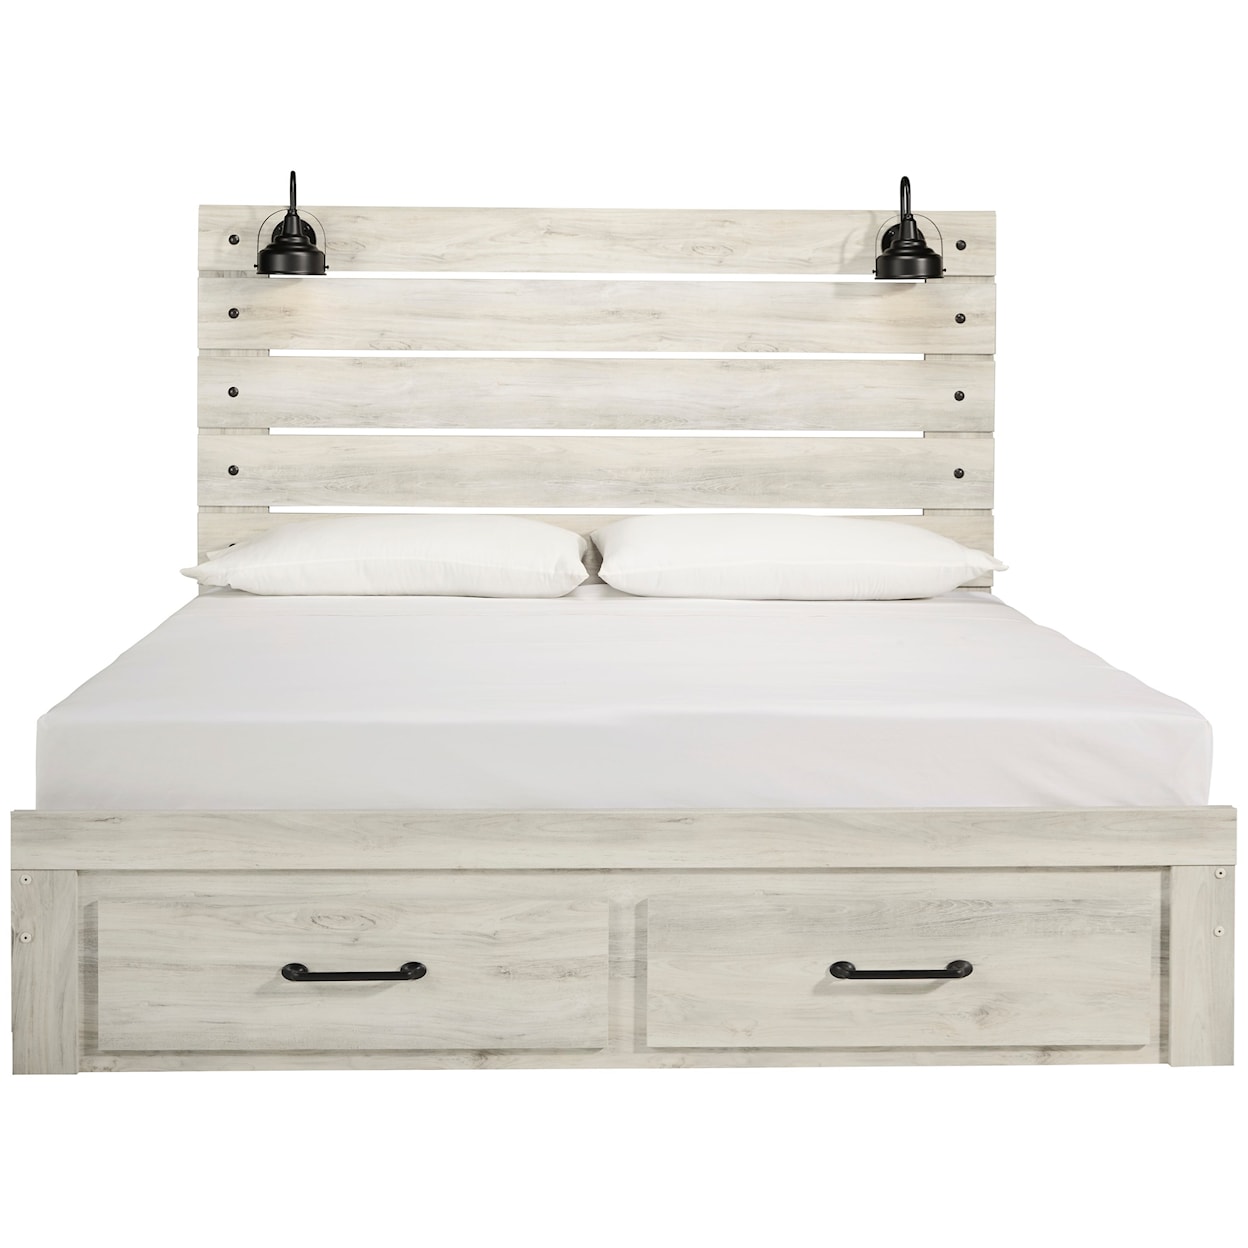 Signature Design by Ashley Furniture Cambeck King Bed w/ Lights & Footboard Drawers